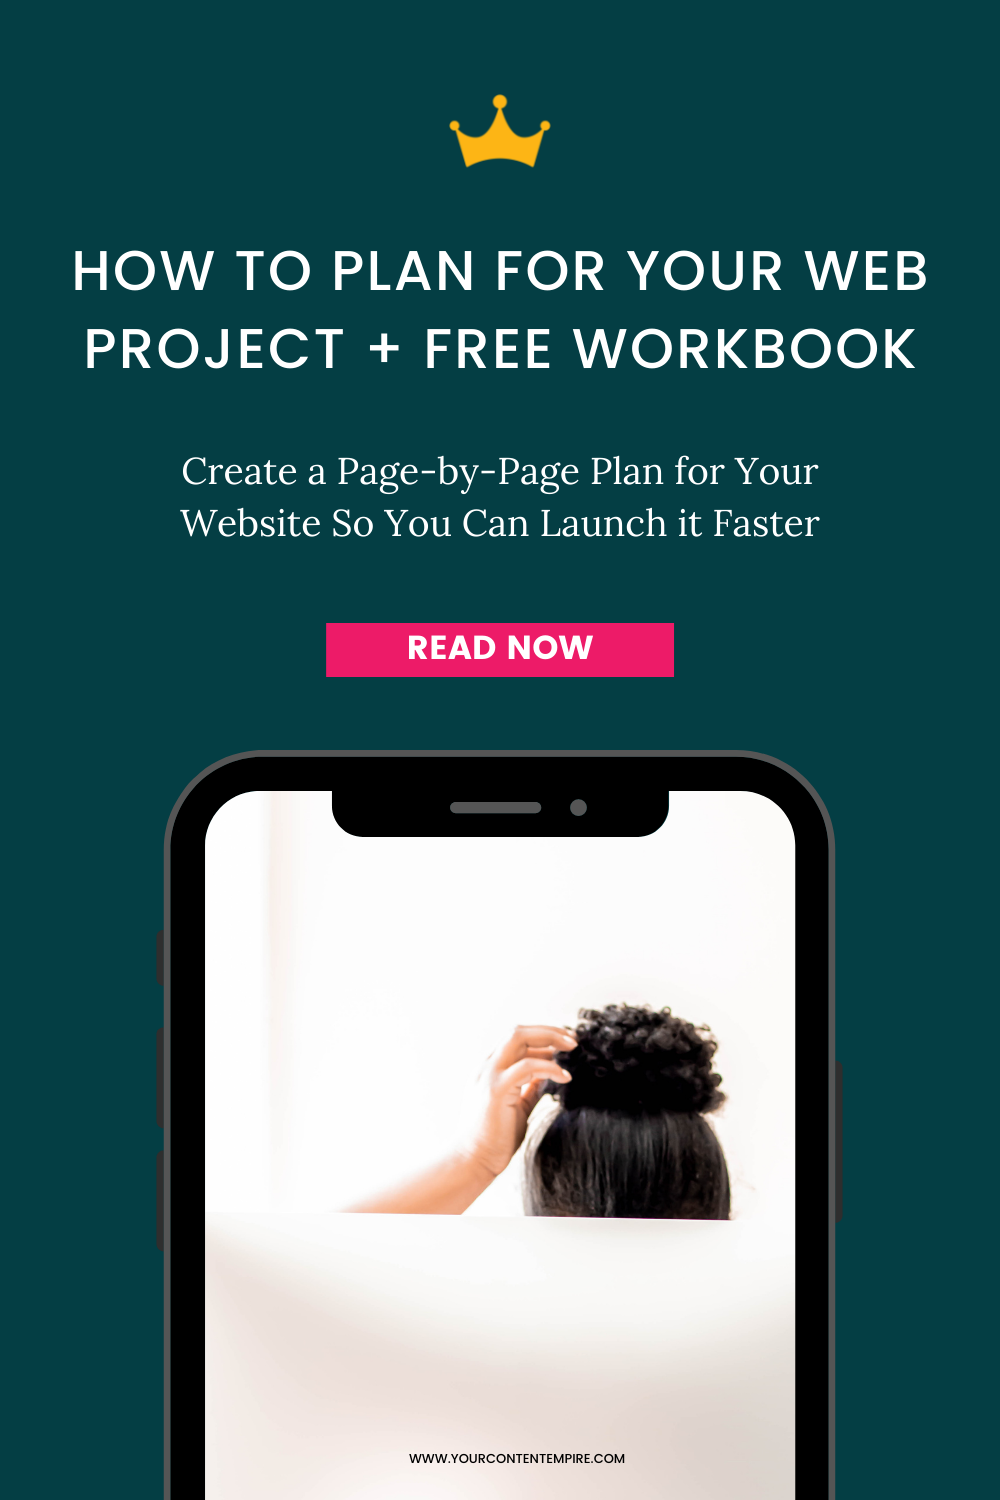 How To Plan For Your Web Project + Free Workbook